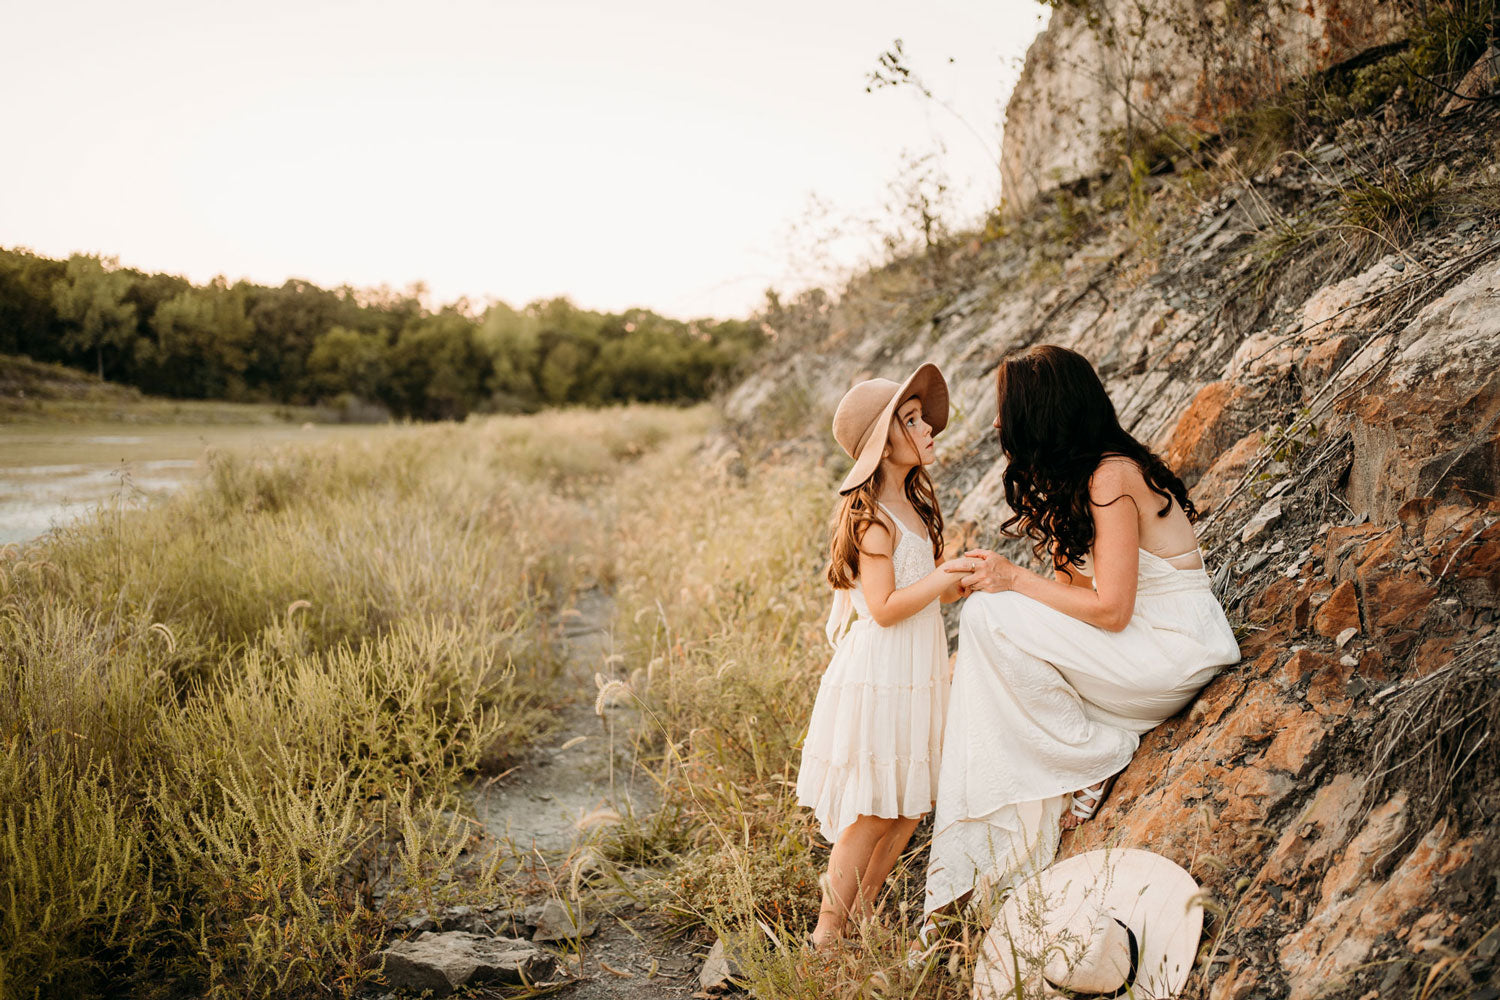 Mother and daughter wearing light, flown dresses holding hands while looking at each other. They are wearing dainty, minimalist jewelry. The backdrop is a field with rocky hillside and tall grasses.